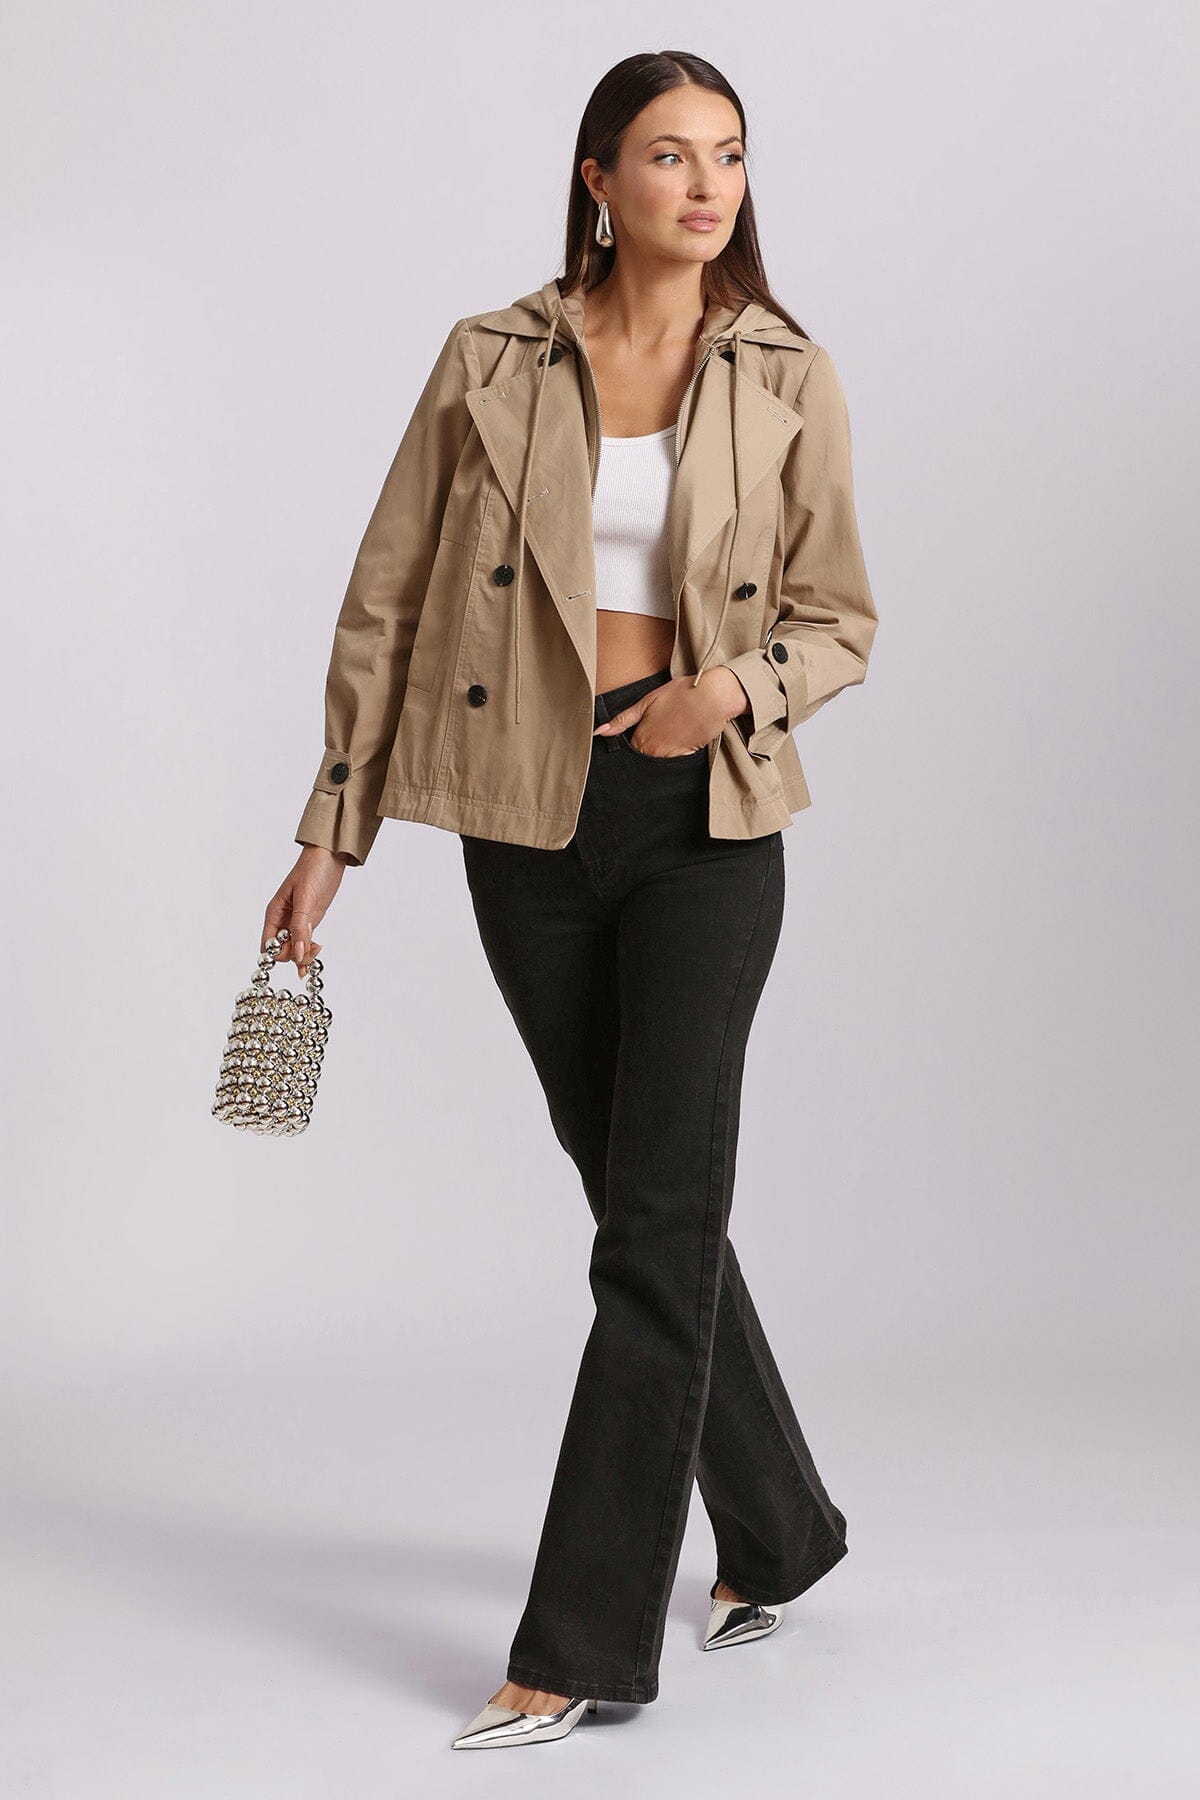 Khaki cotton blend hooded short trench coat - figure flattering fashion coats outerwear for women's Spring Summer trends